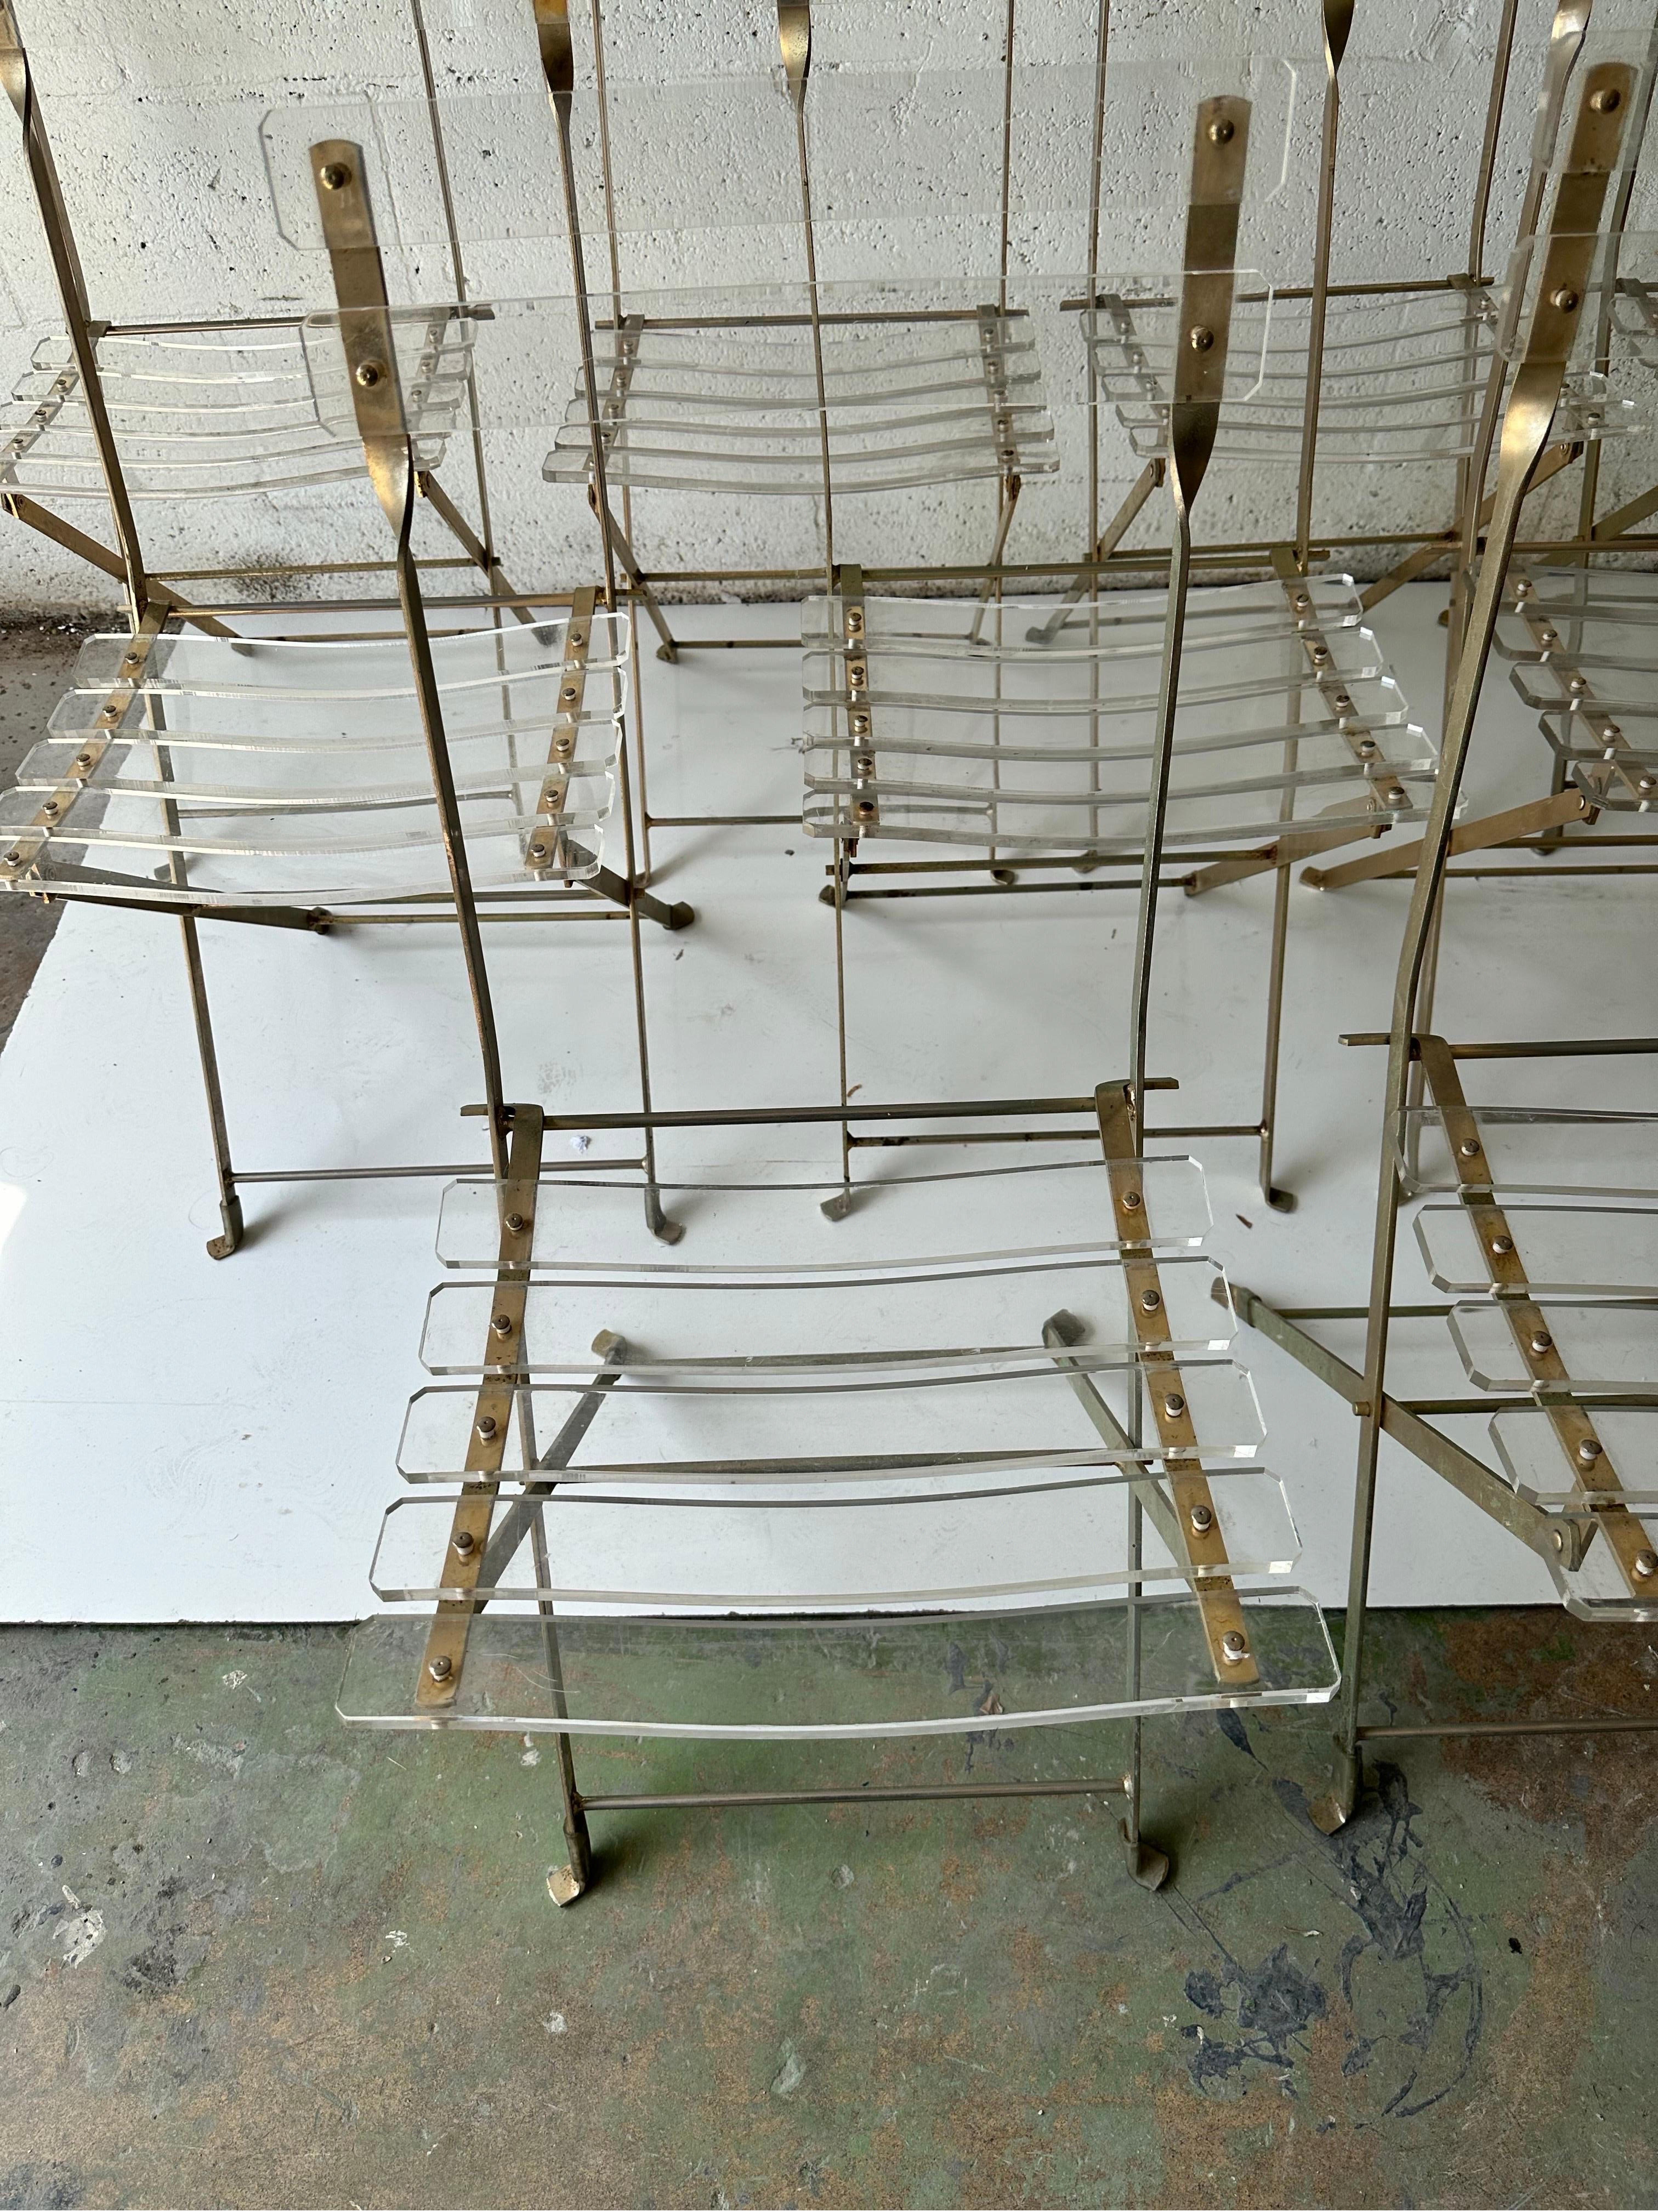 Fantastic set of 16 Lucite folding chairs by Yonel Lebovici, in brass plated steel and Lucite.  For Marais International, Edition du Marais. Circa 1970.